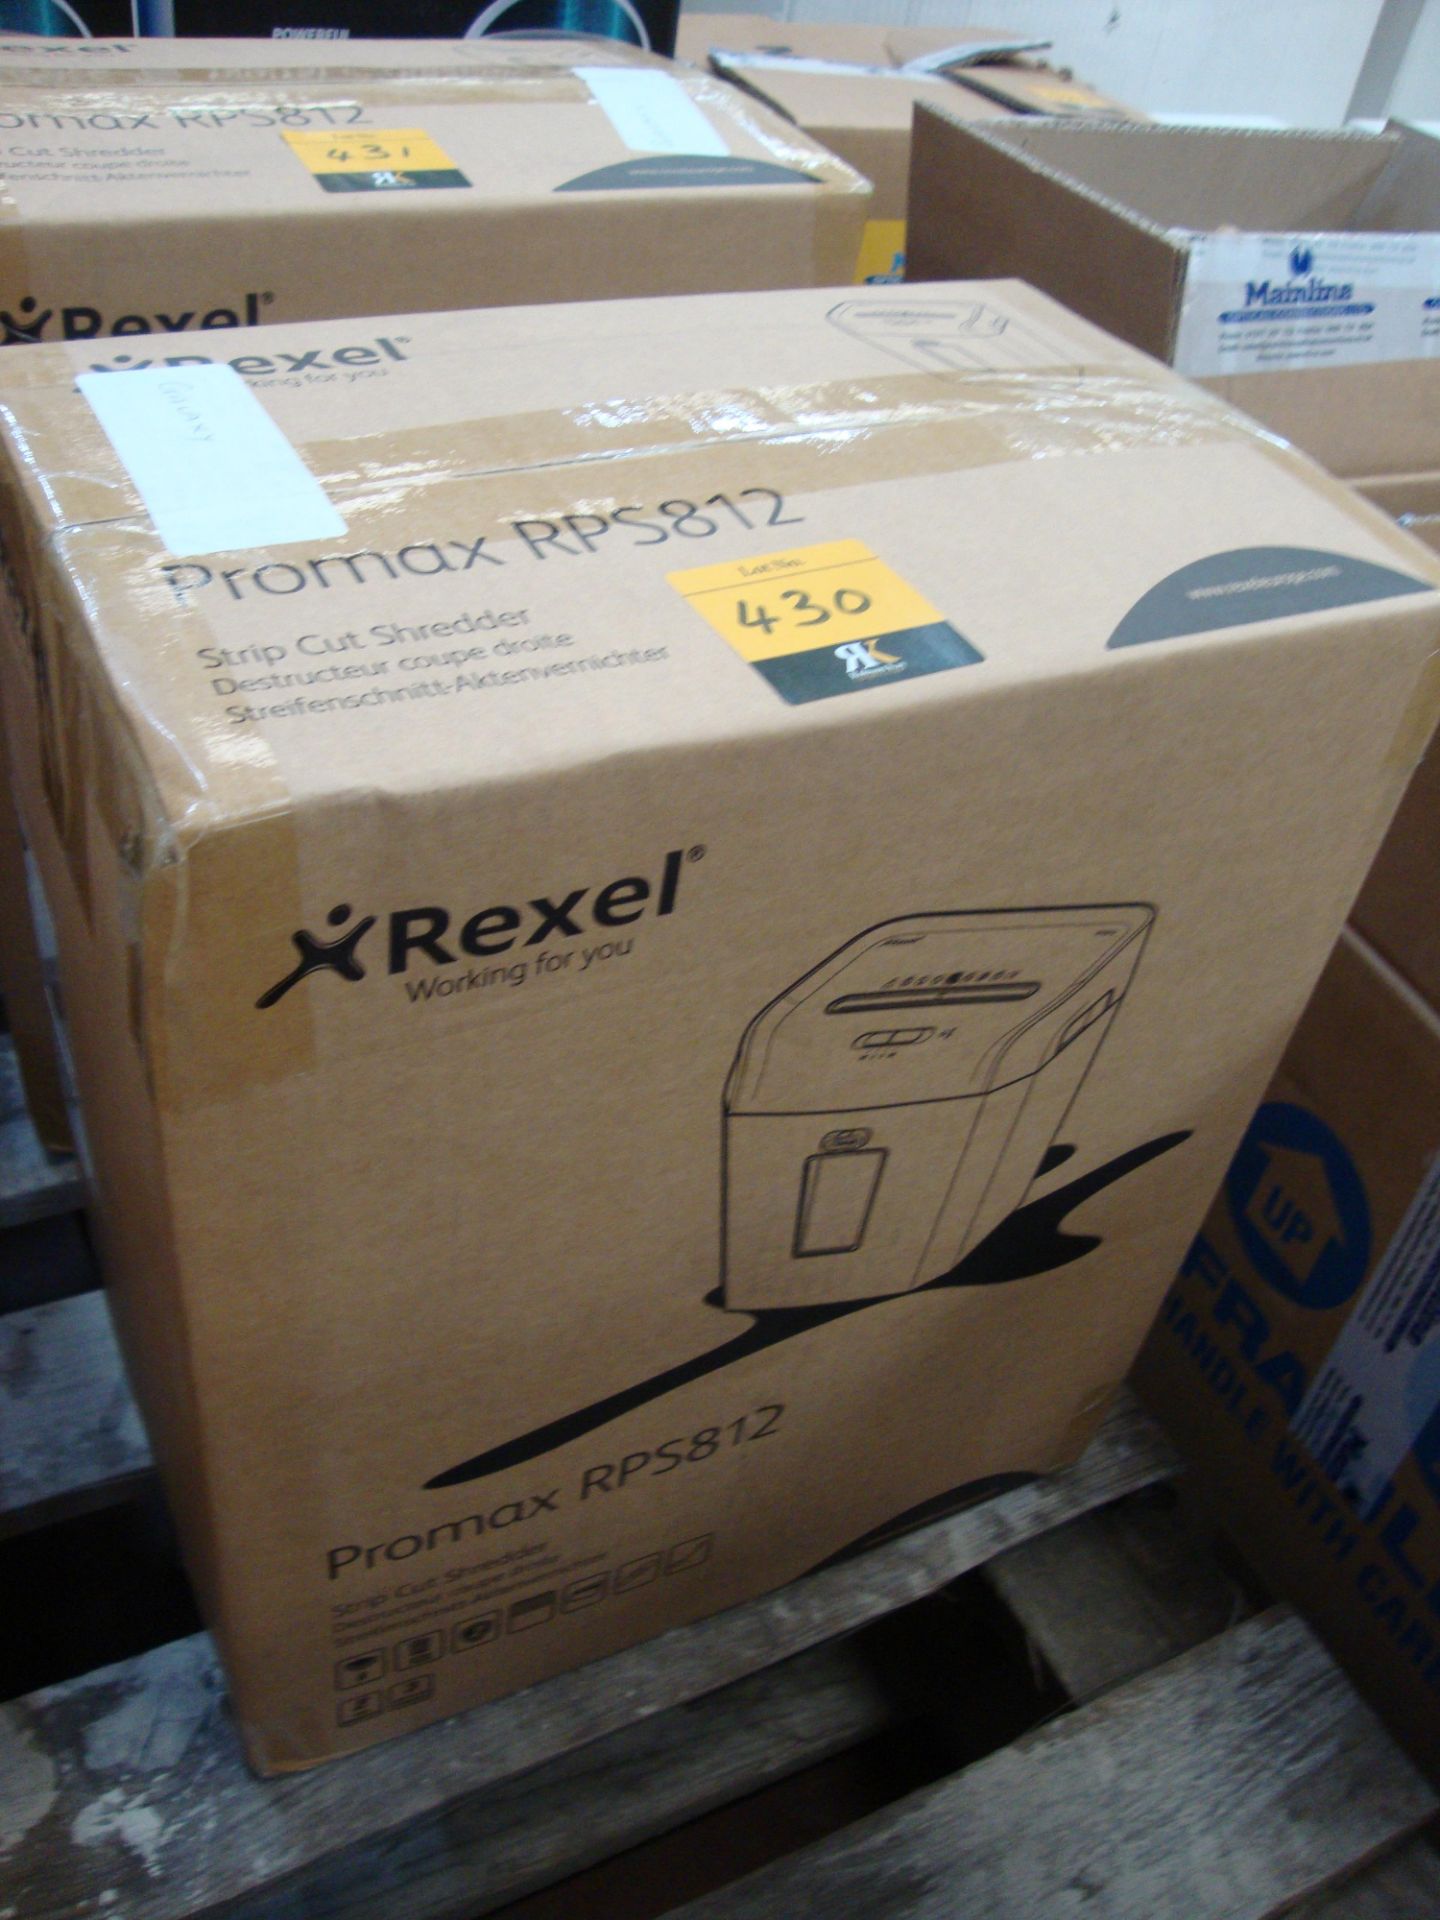 Rexel paper/office shredder model Promax RPS812 - appears boxed, new and unused All the lots in this - Image 2 of 2